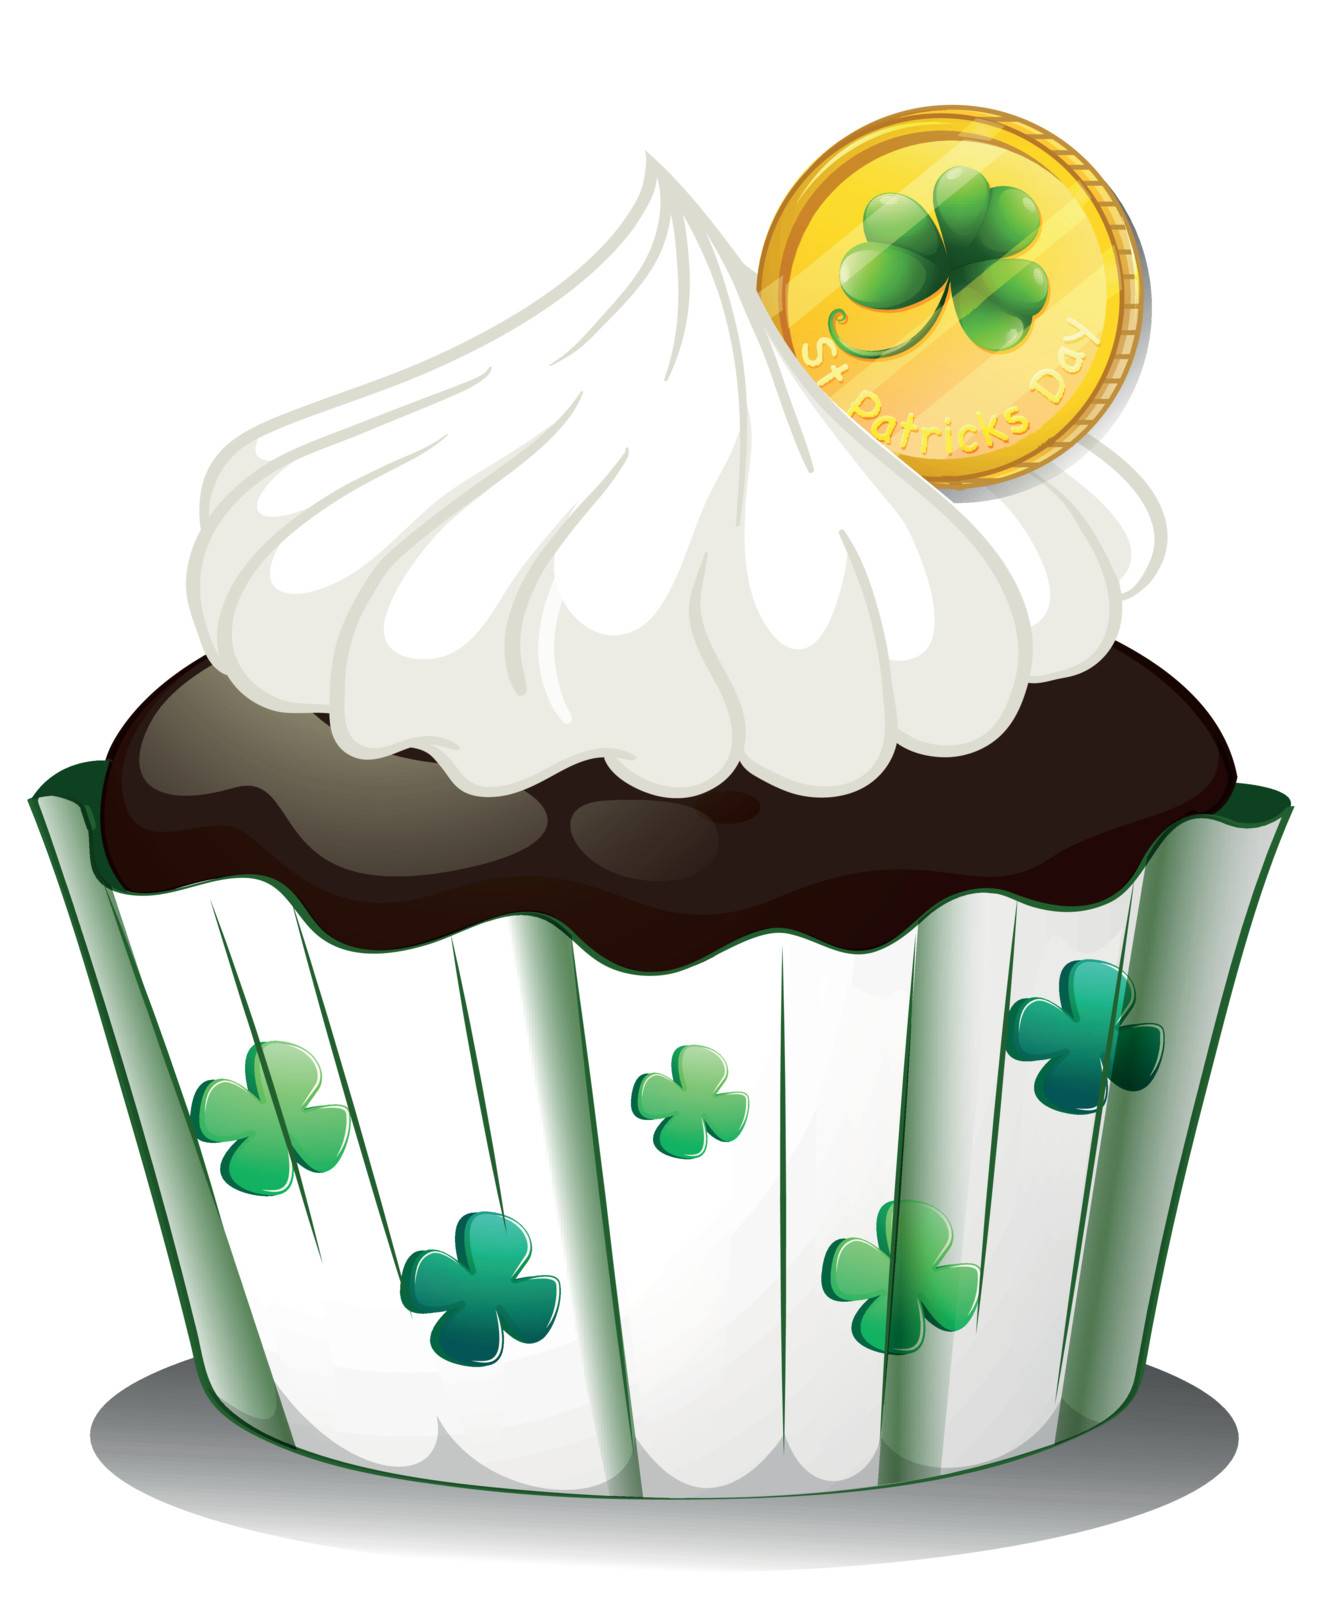 Illustration of a chocolate cupcake with a token on a white background